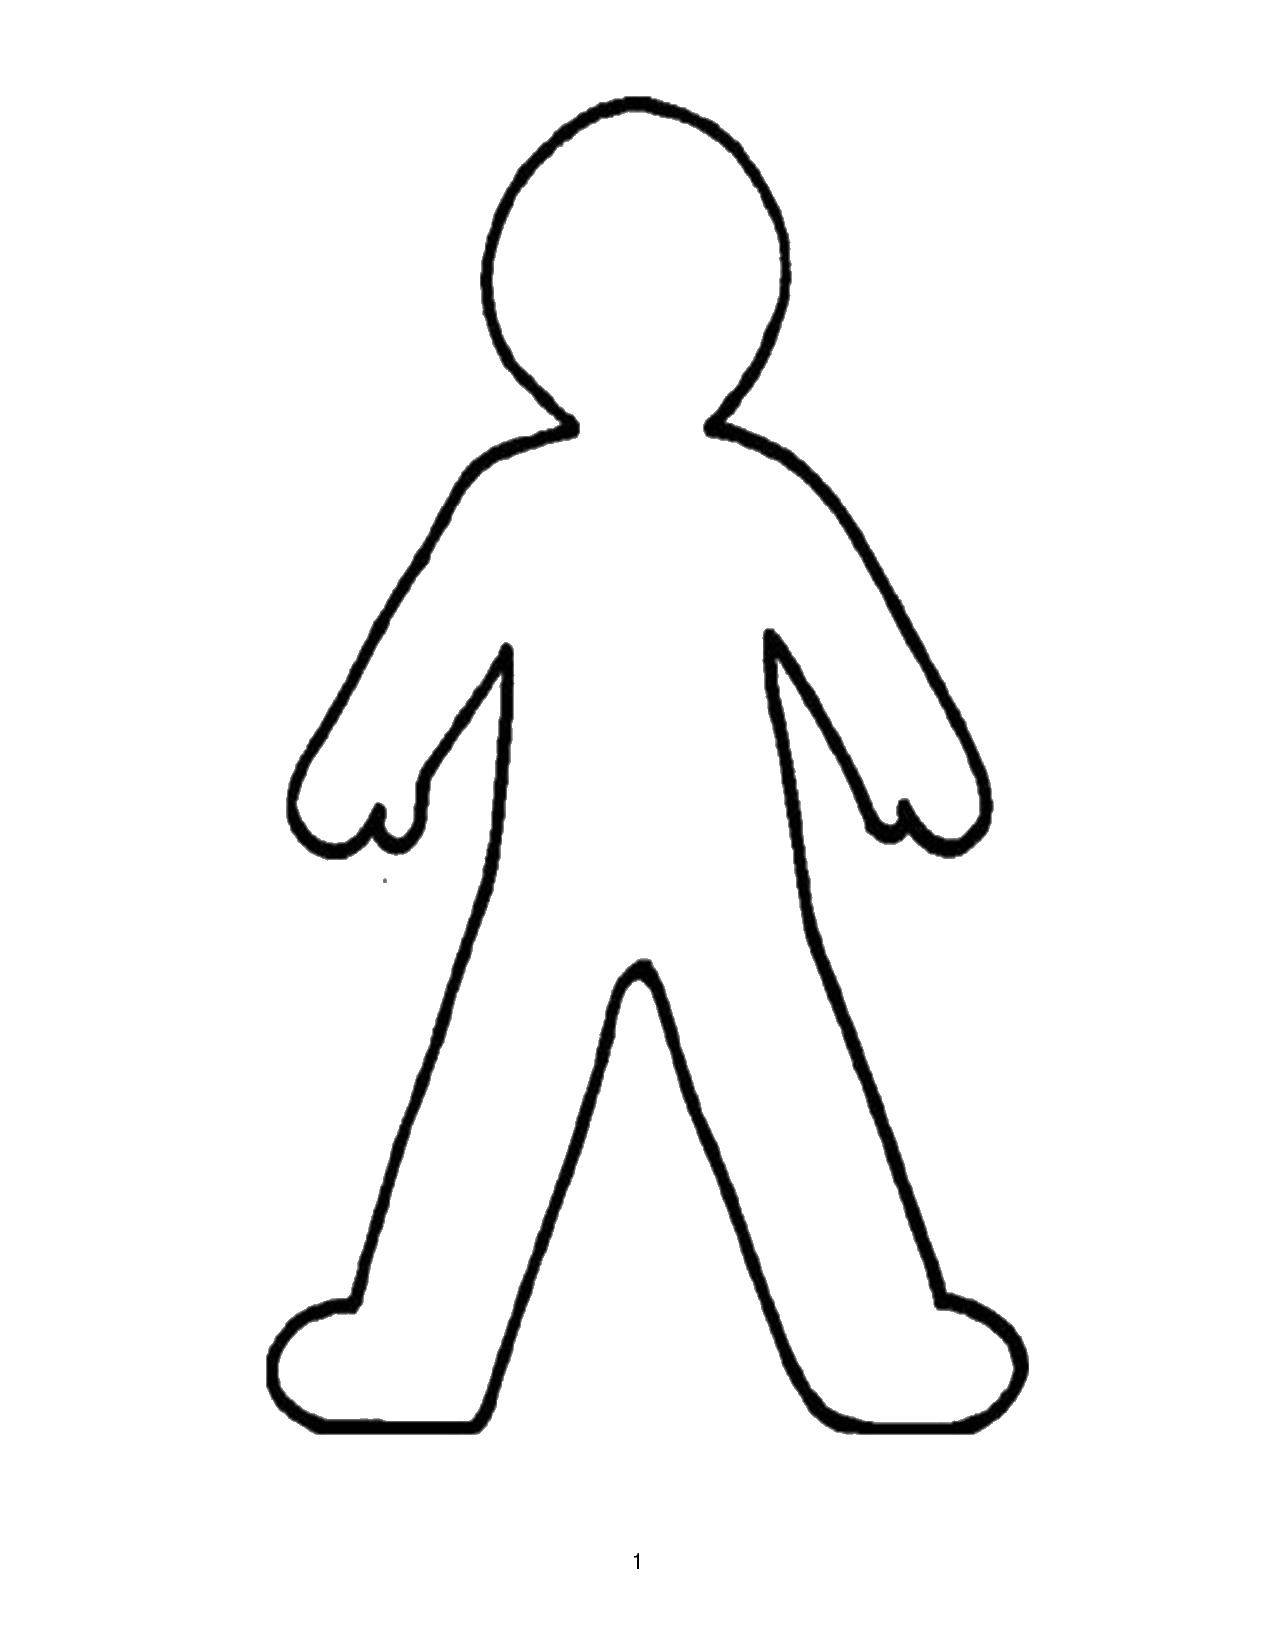 Coloring The outline of the child. Category The contours of a person to cut. Tags:  Outline , girls.